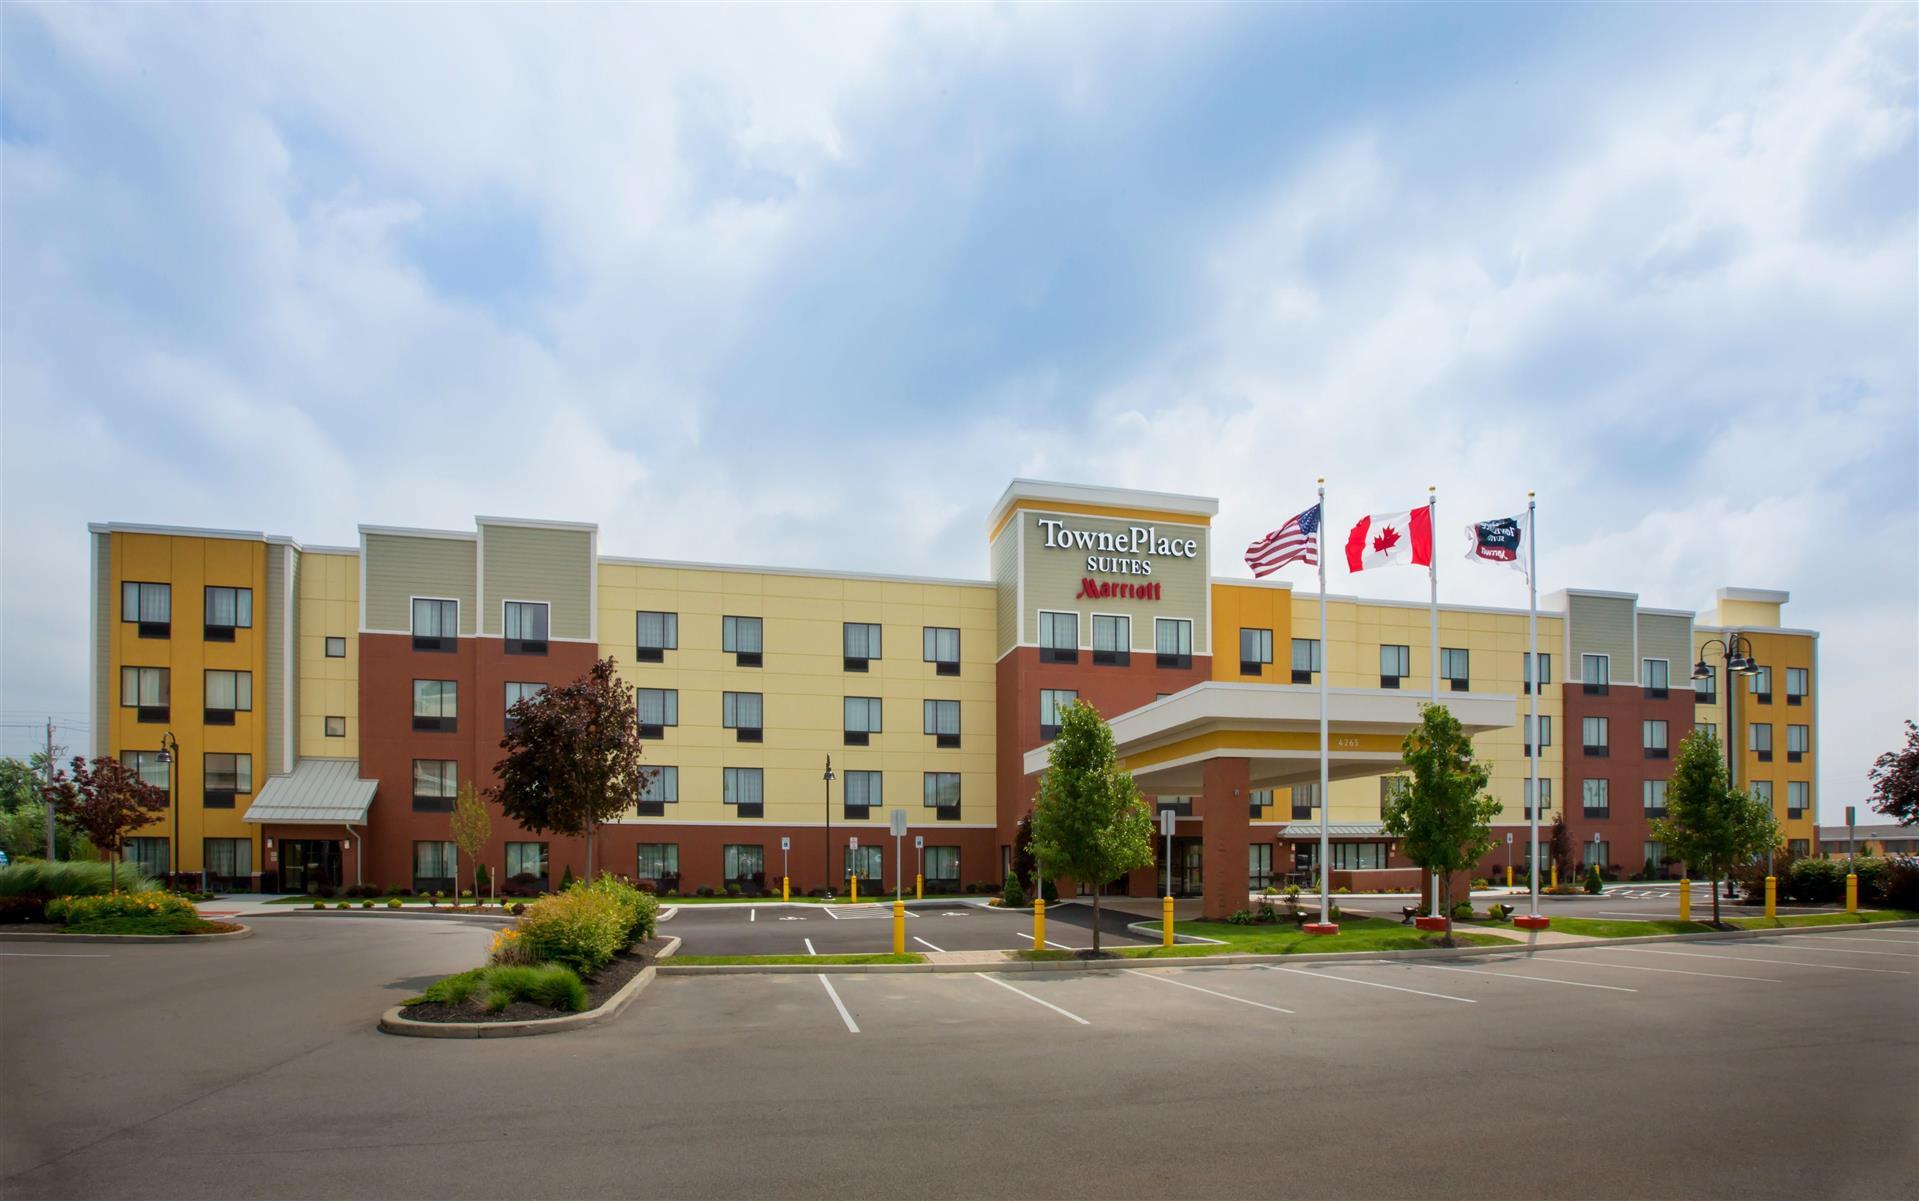 TownePlace Suites Buffalo Airport in Cheektowaga, NY